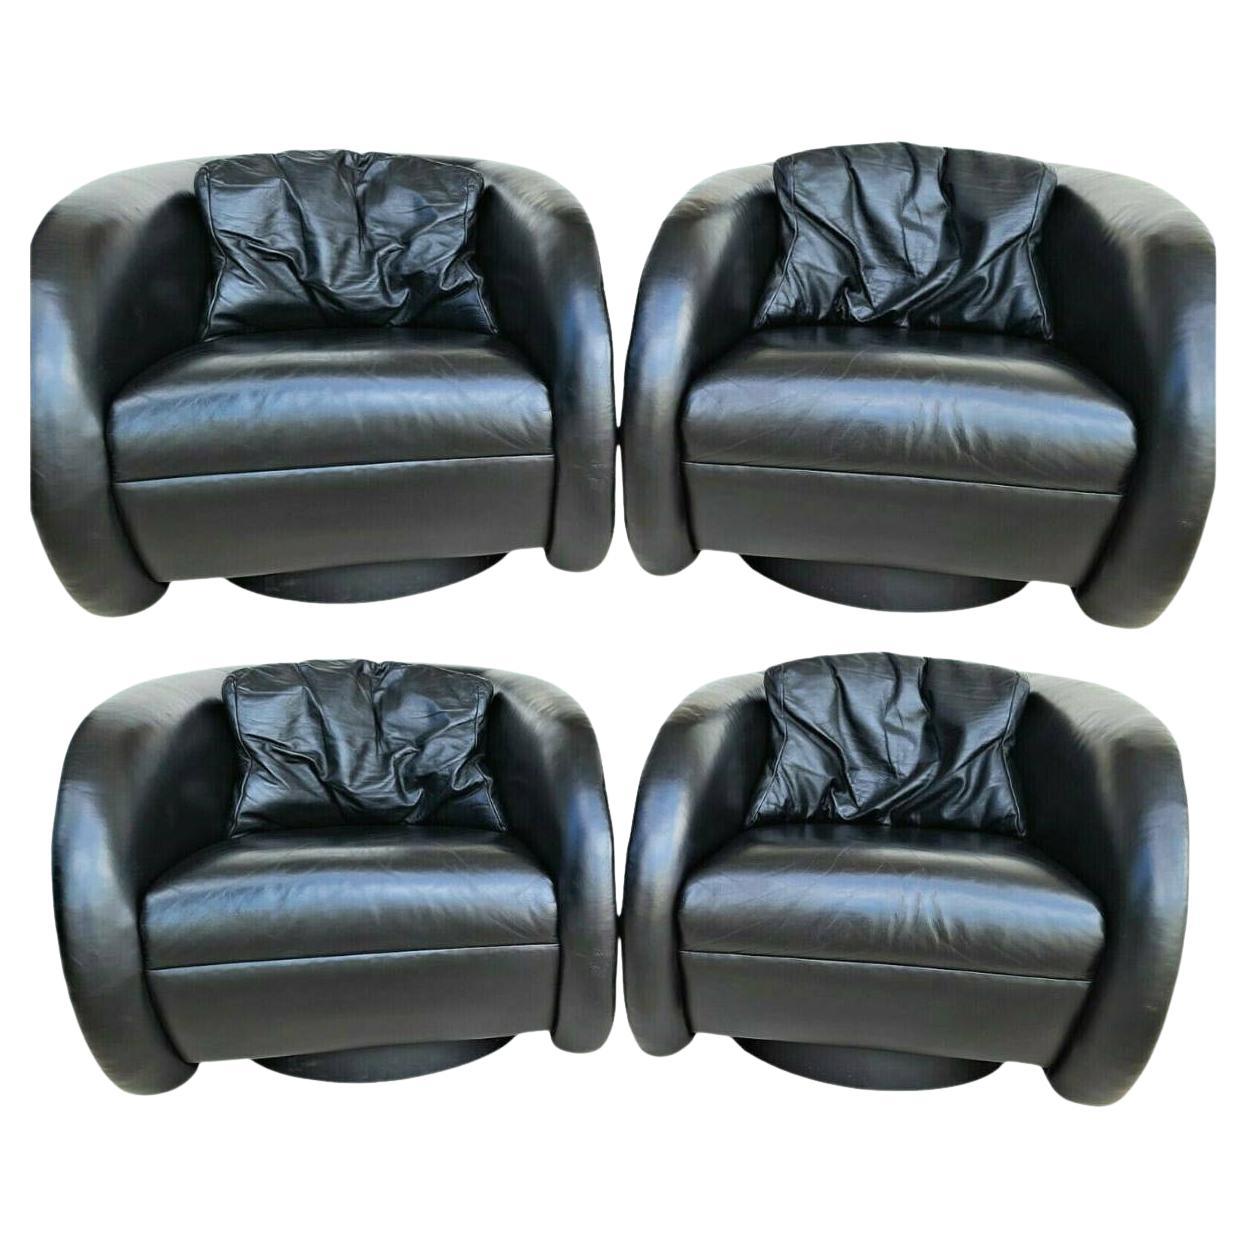 Set of 4 Mid-Century Modern Black Leather Swivel Barrel Lounge Chairs by Preview For Sale